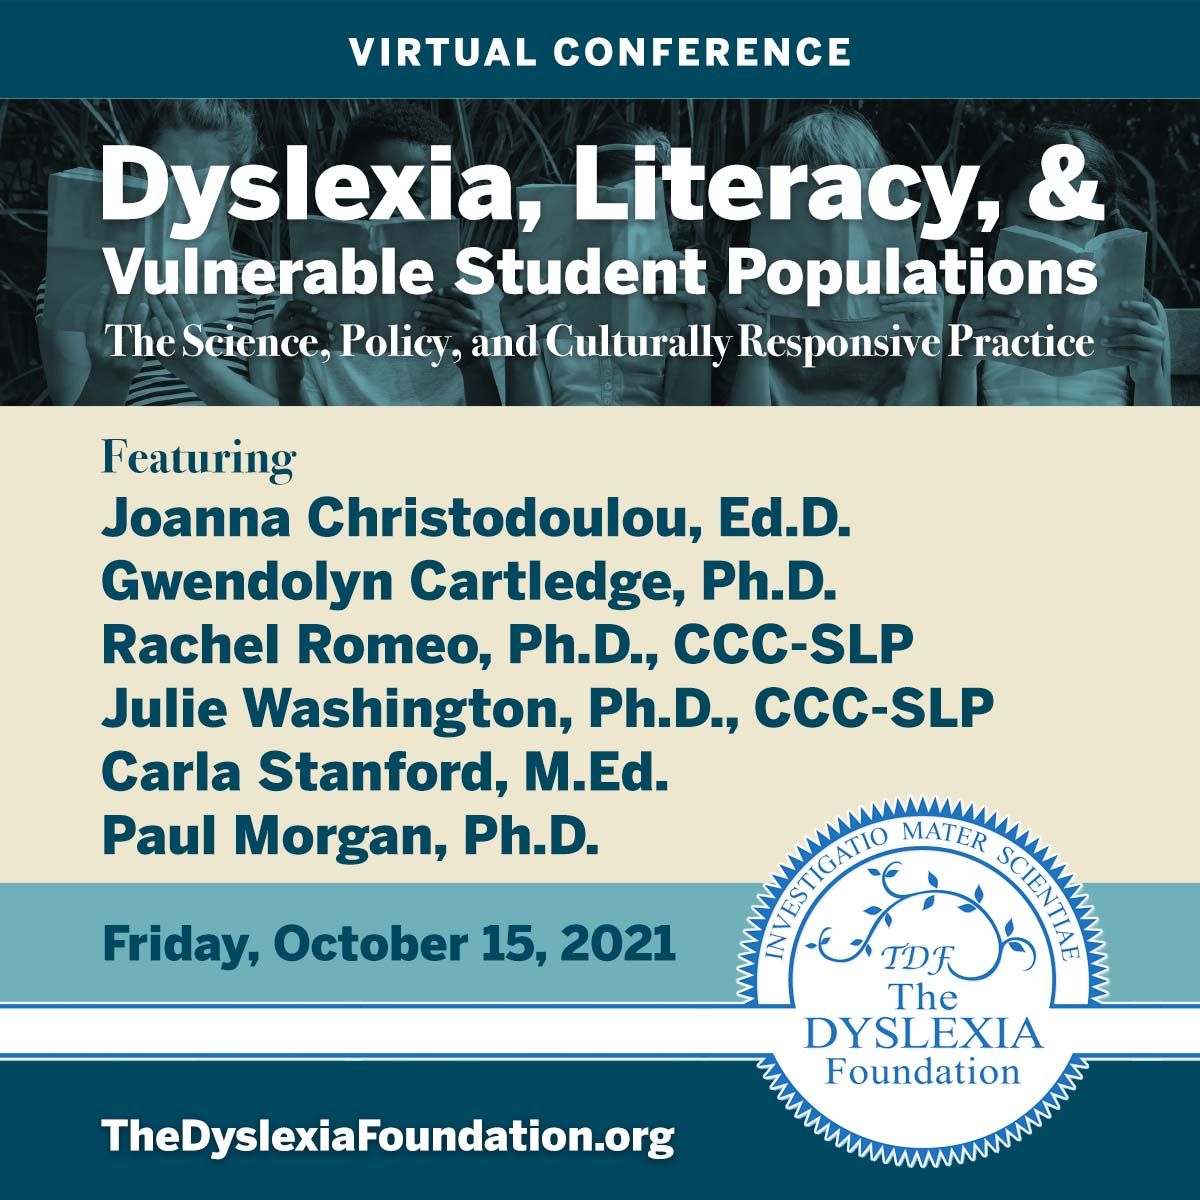 Join us virtually Friday October 15, 2021 Dyslexia, Literacy & Vulnerable Student Populations. Dr. Paul Morgan will be speaking on 'Re-Thinking Over and Underrepresentation of Black, Latinx, and American Indian Students in Special Education' Register: buff.ly/2MKVA2f